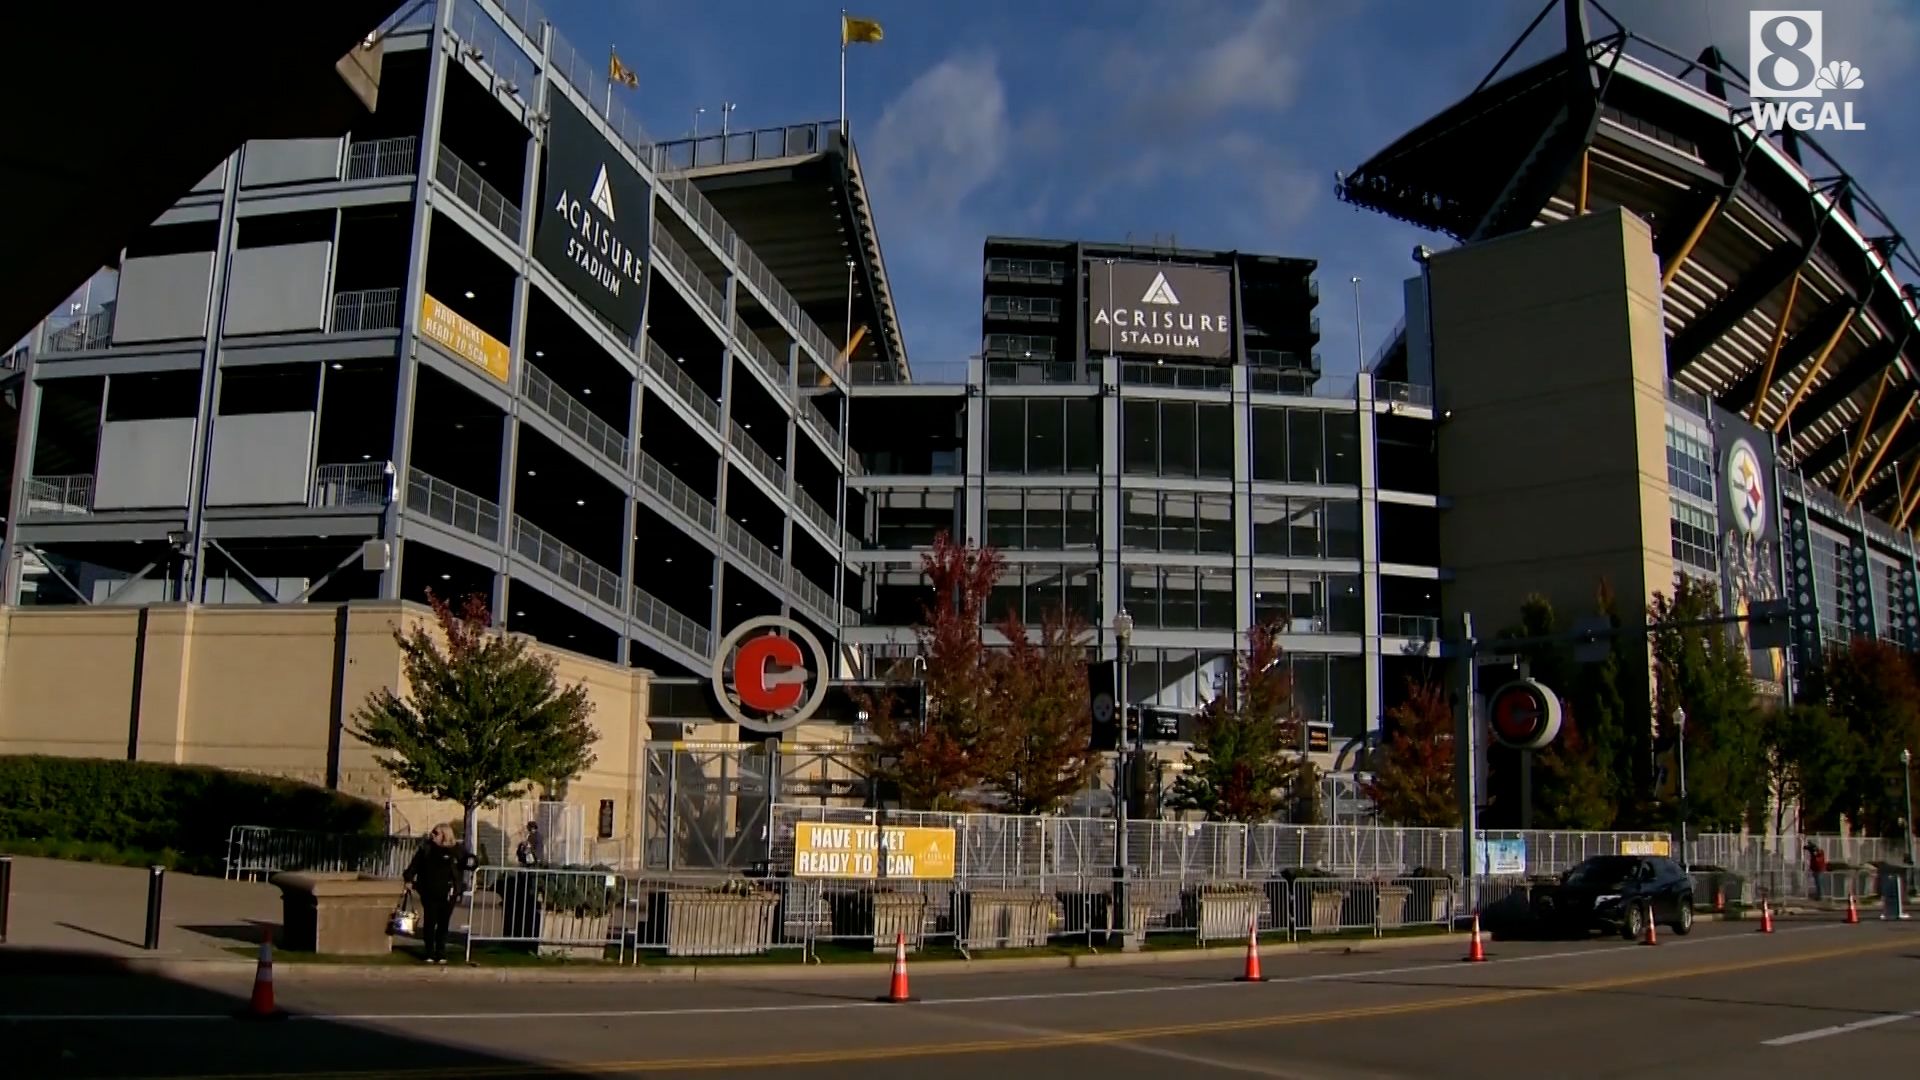 Man killed in fall at Pittsburgh Steelers game on Sunday